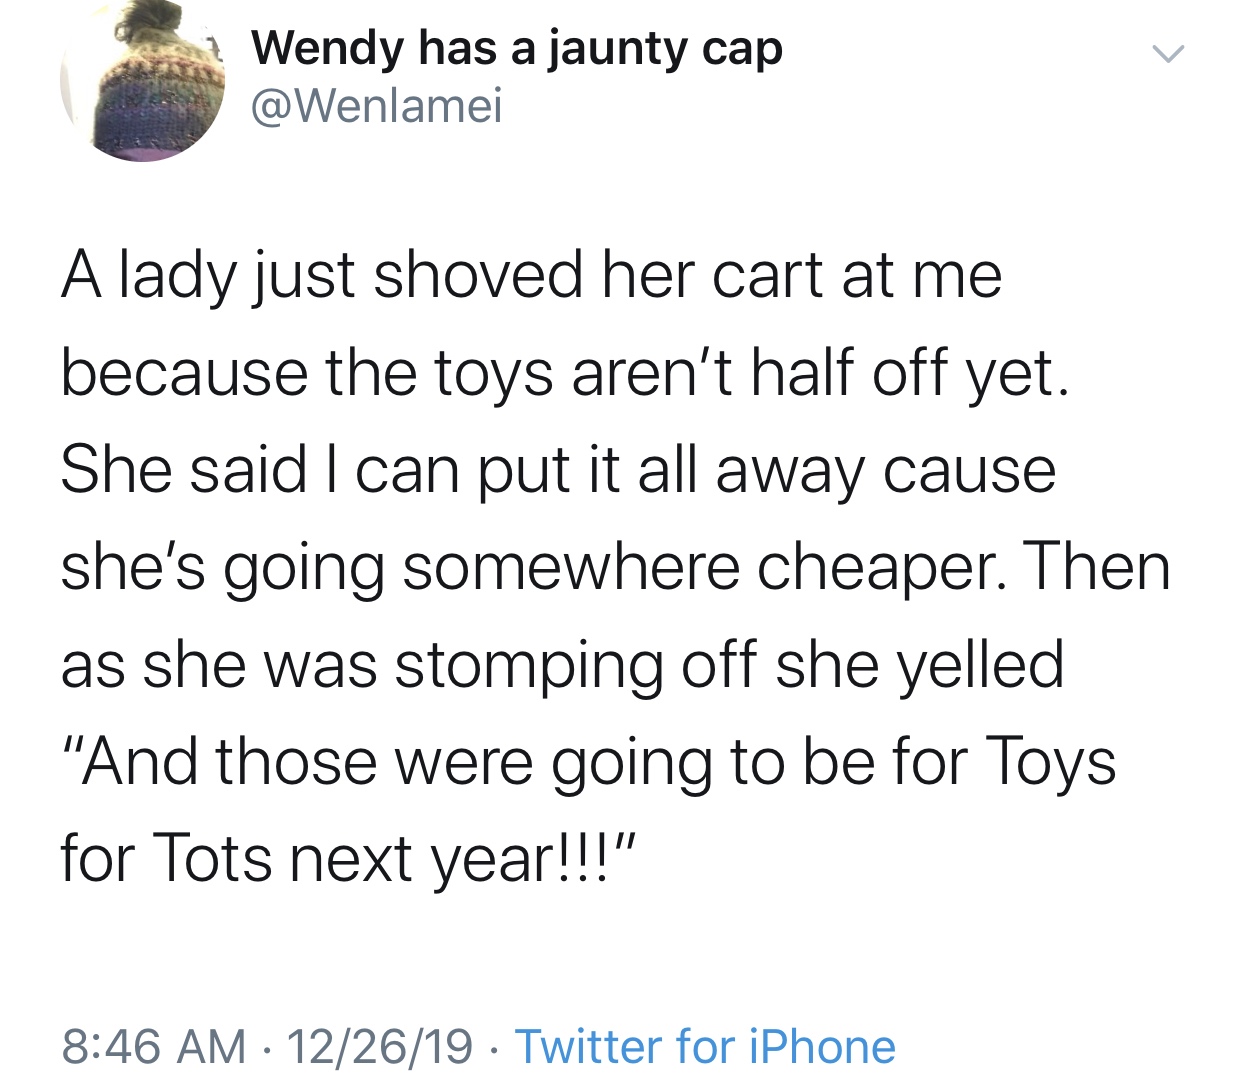 angle - Wendy has a jaunty cap A lady just shoved her cart at me because the toys aren't half off yet. She said I can put it all away cause she's going somewhere cheaper. Then as she was stomping off she yelled "And those were going to be for Toys for Tot